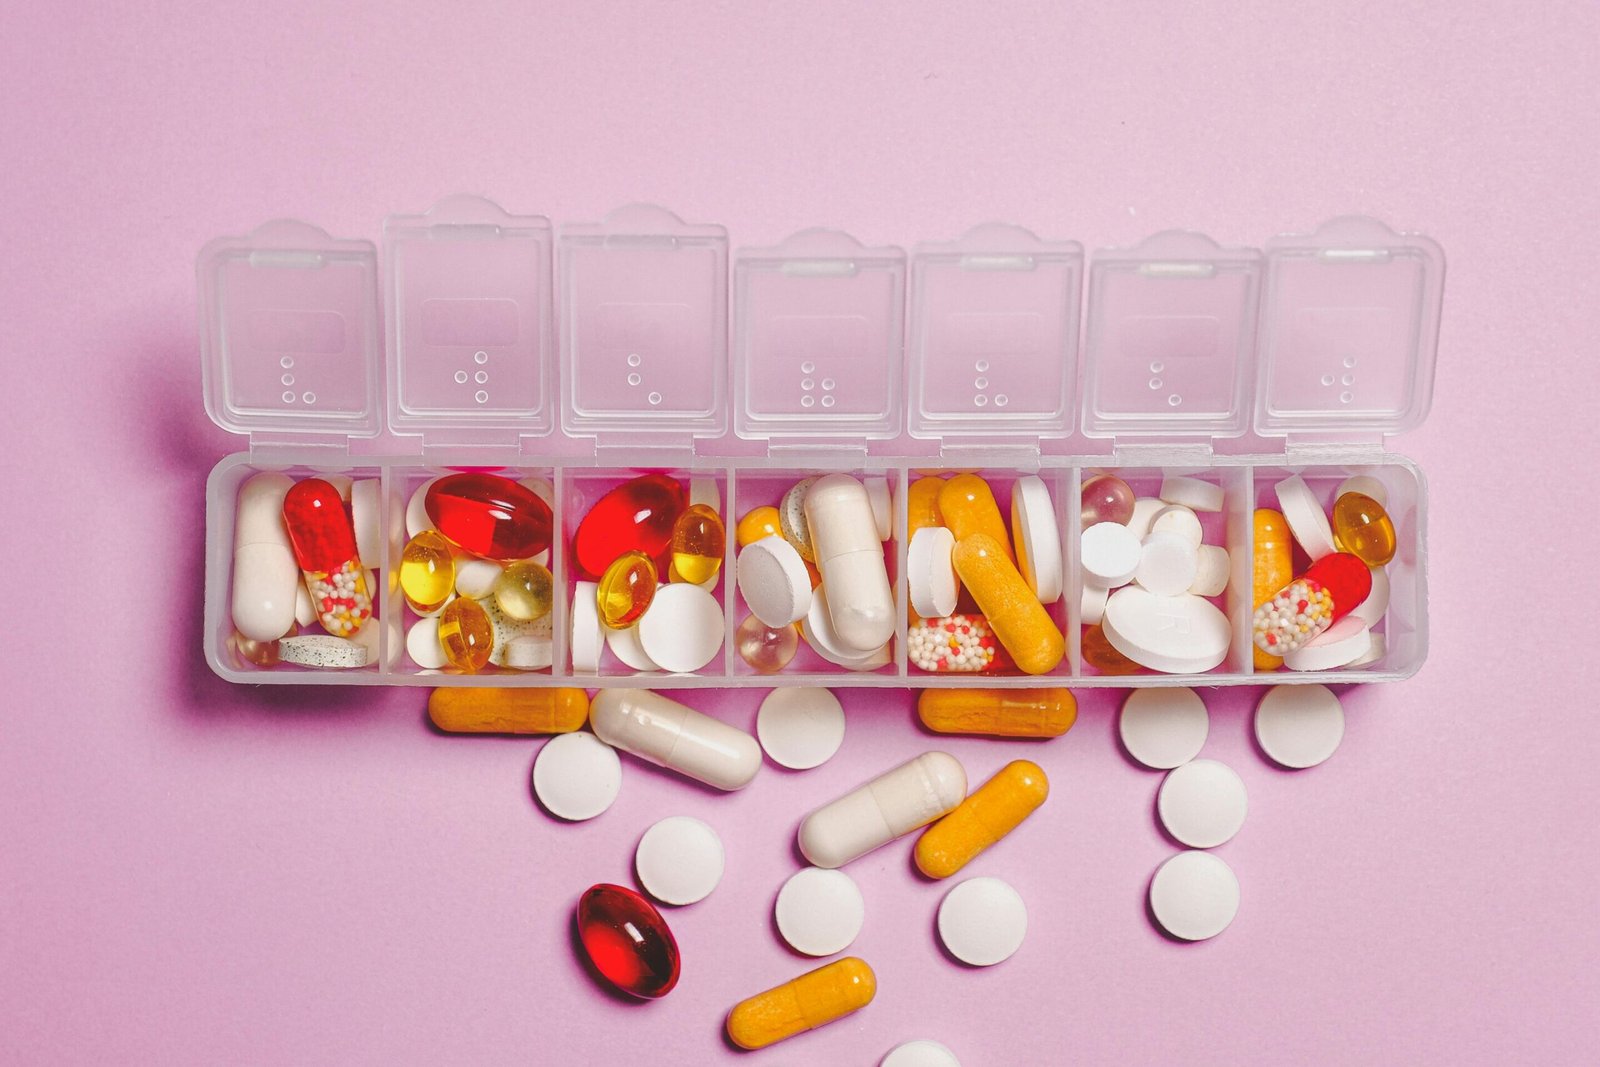 Taking too many medications can pose health risks Heres how to avoid them